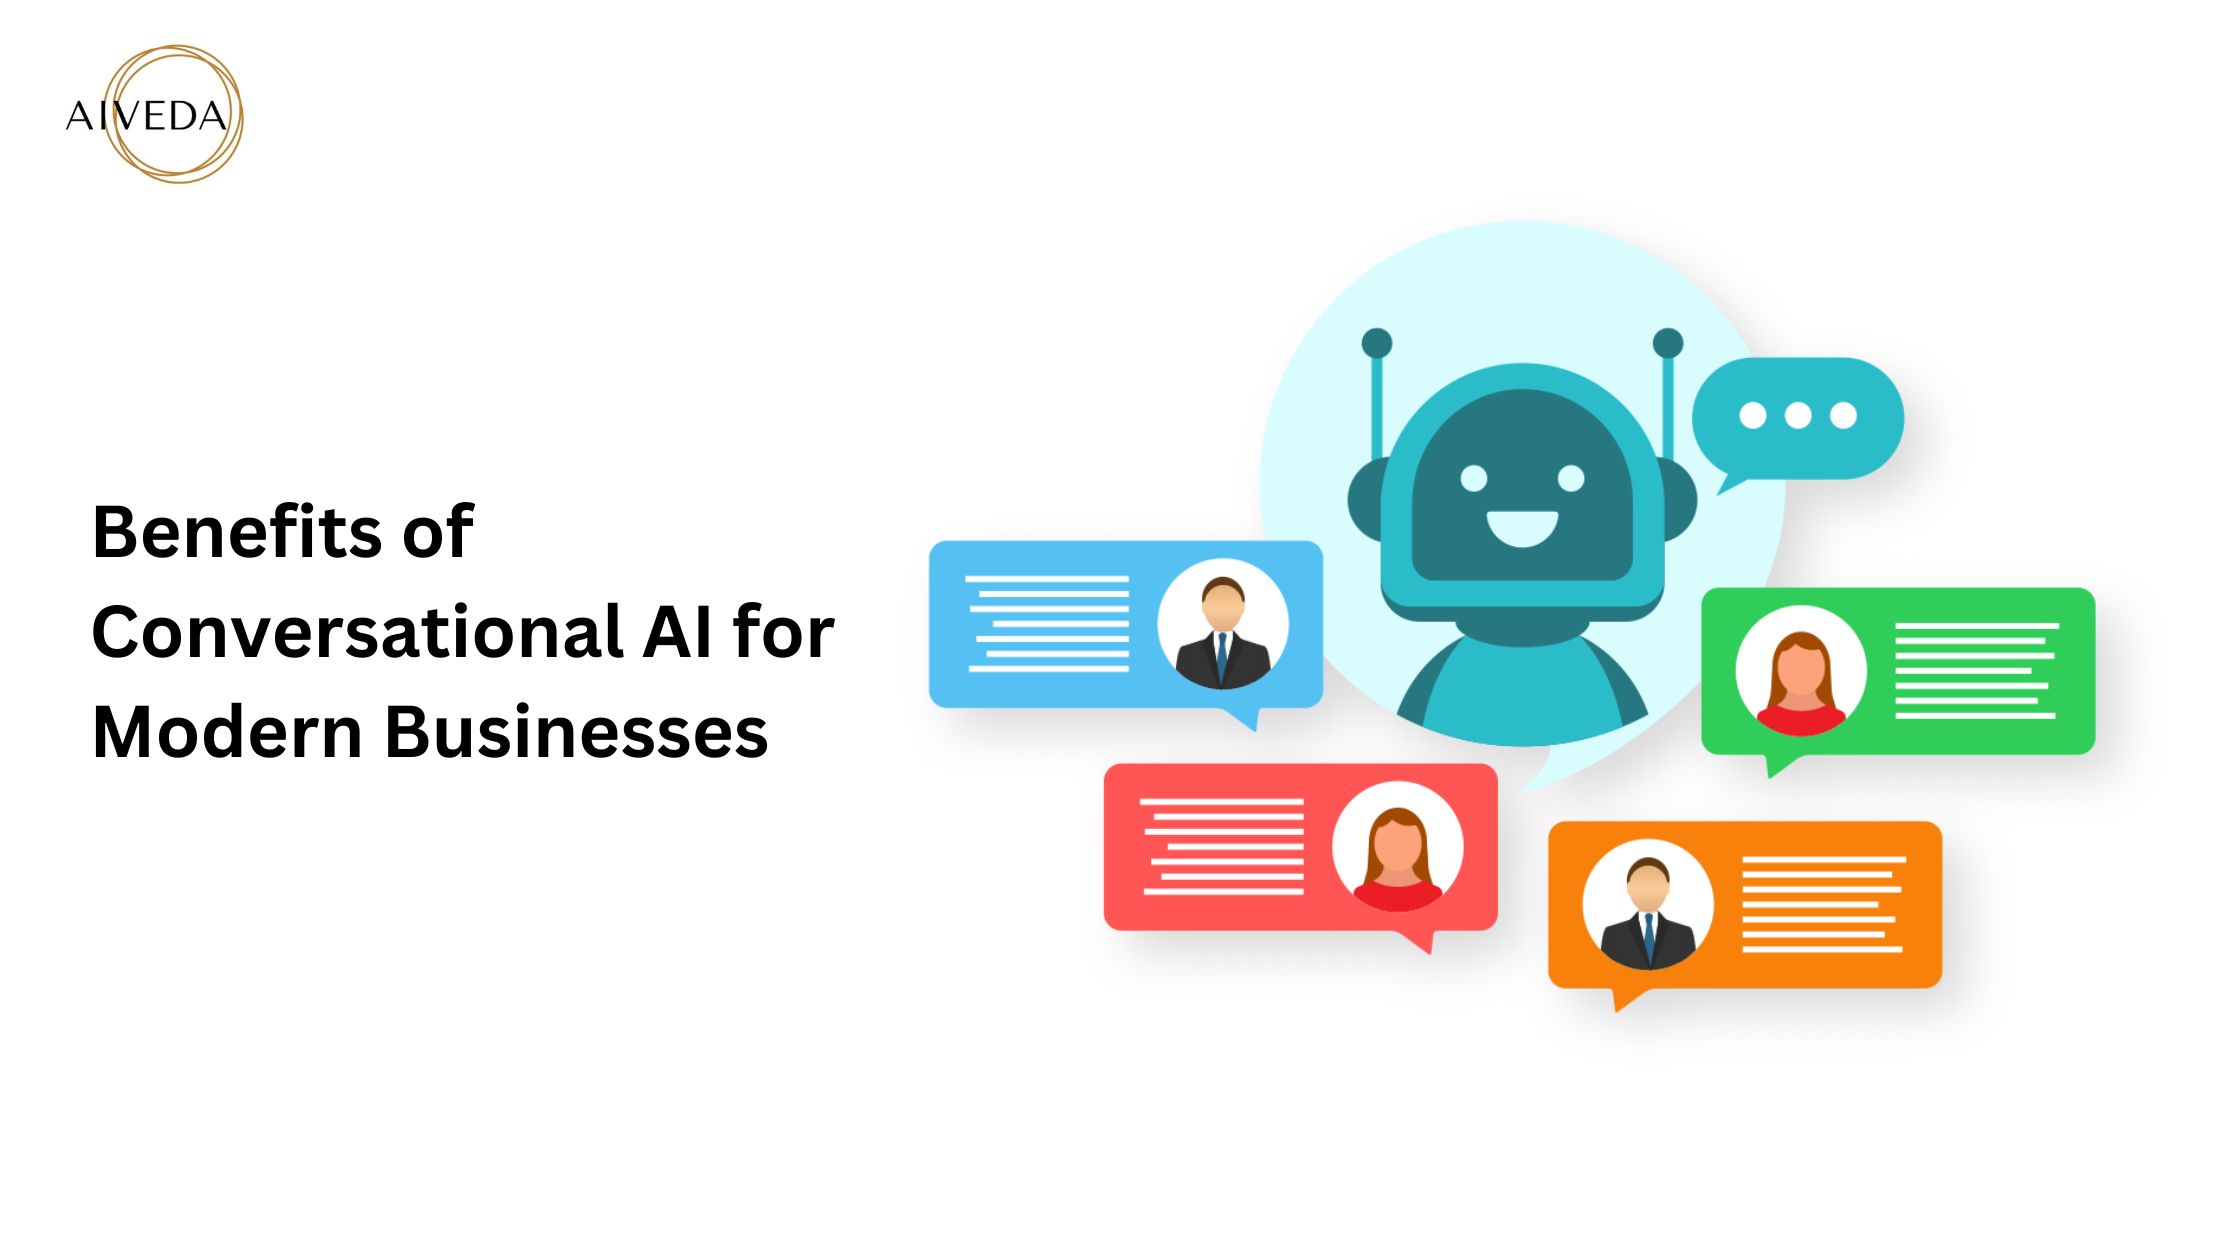 Benefits of Conversational AI for Modern Businesses